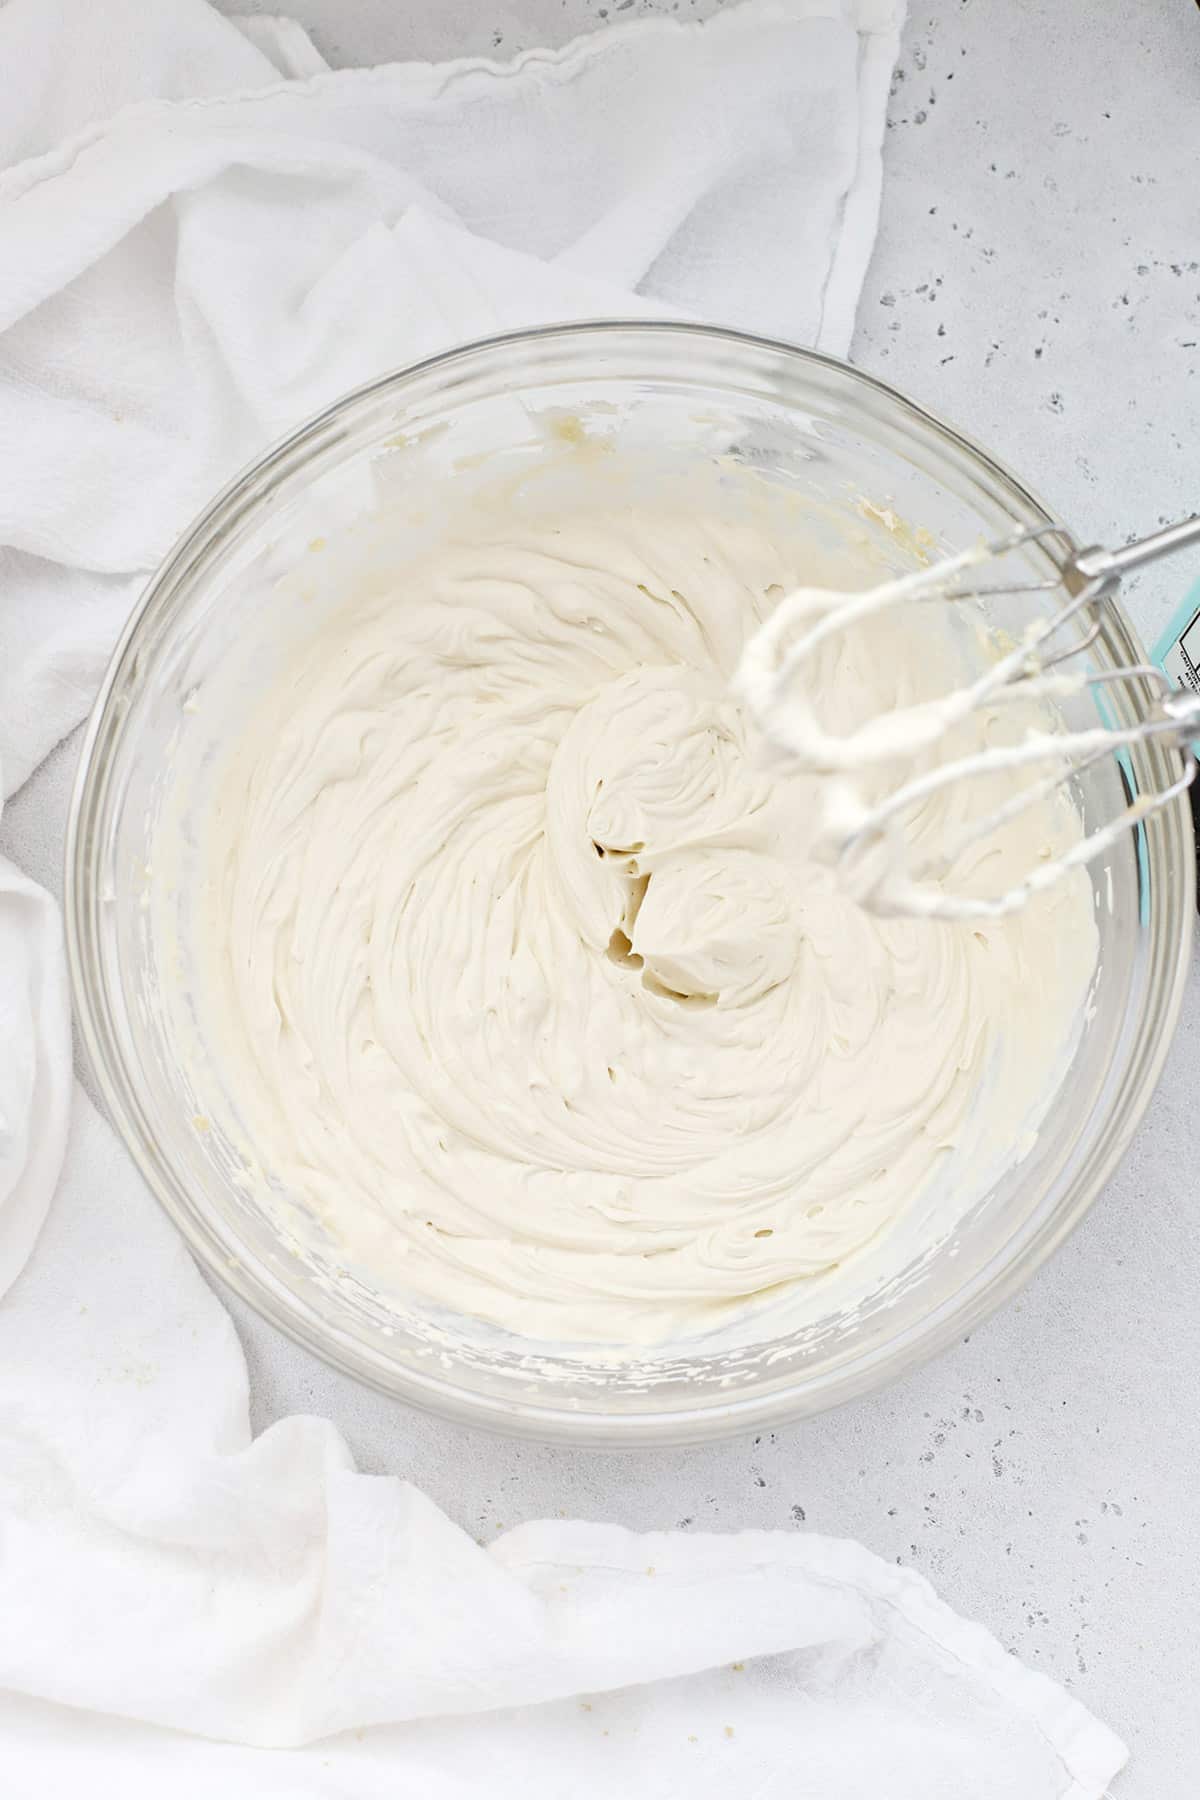 Overhead view of whipped cream cheese frosting in a bowl